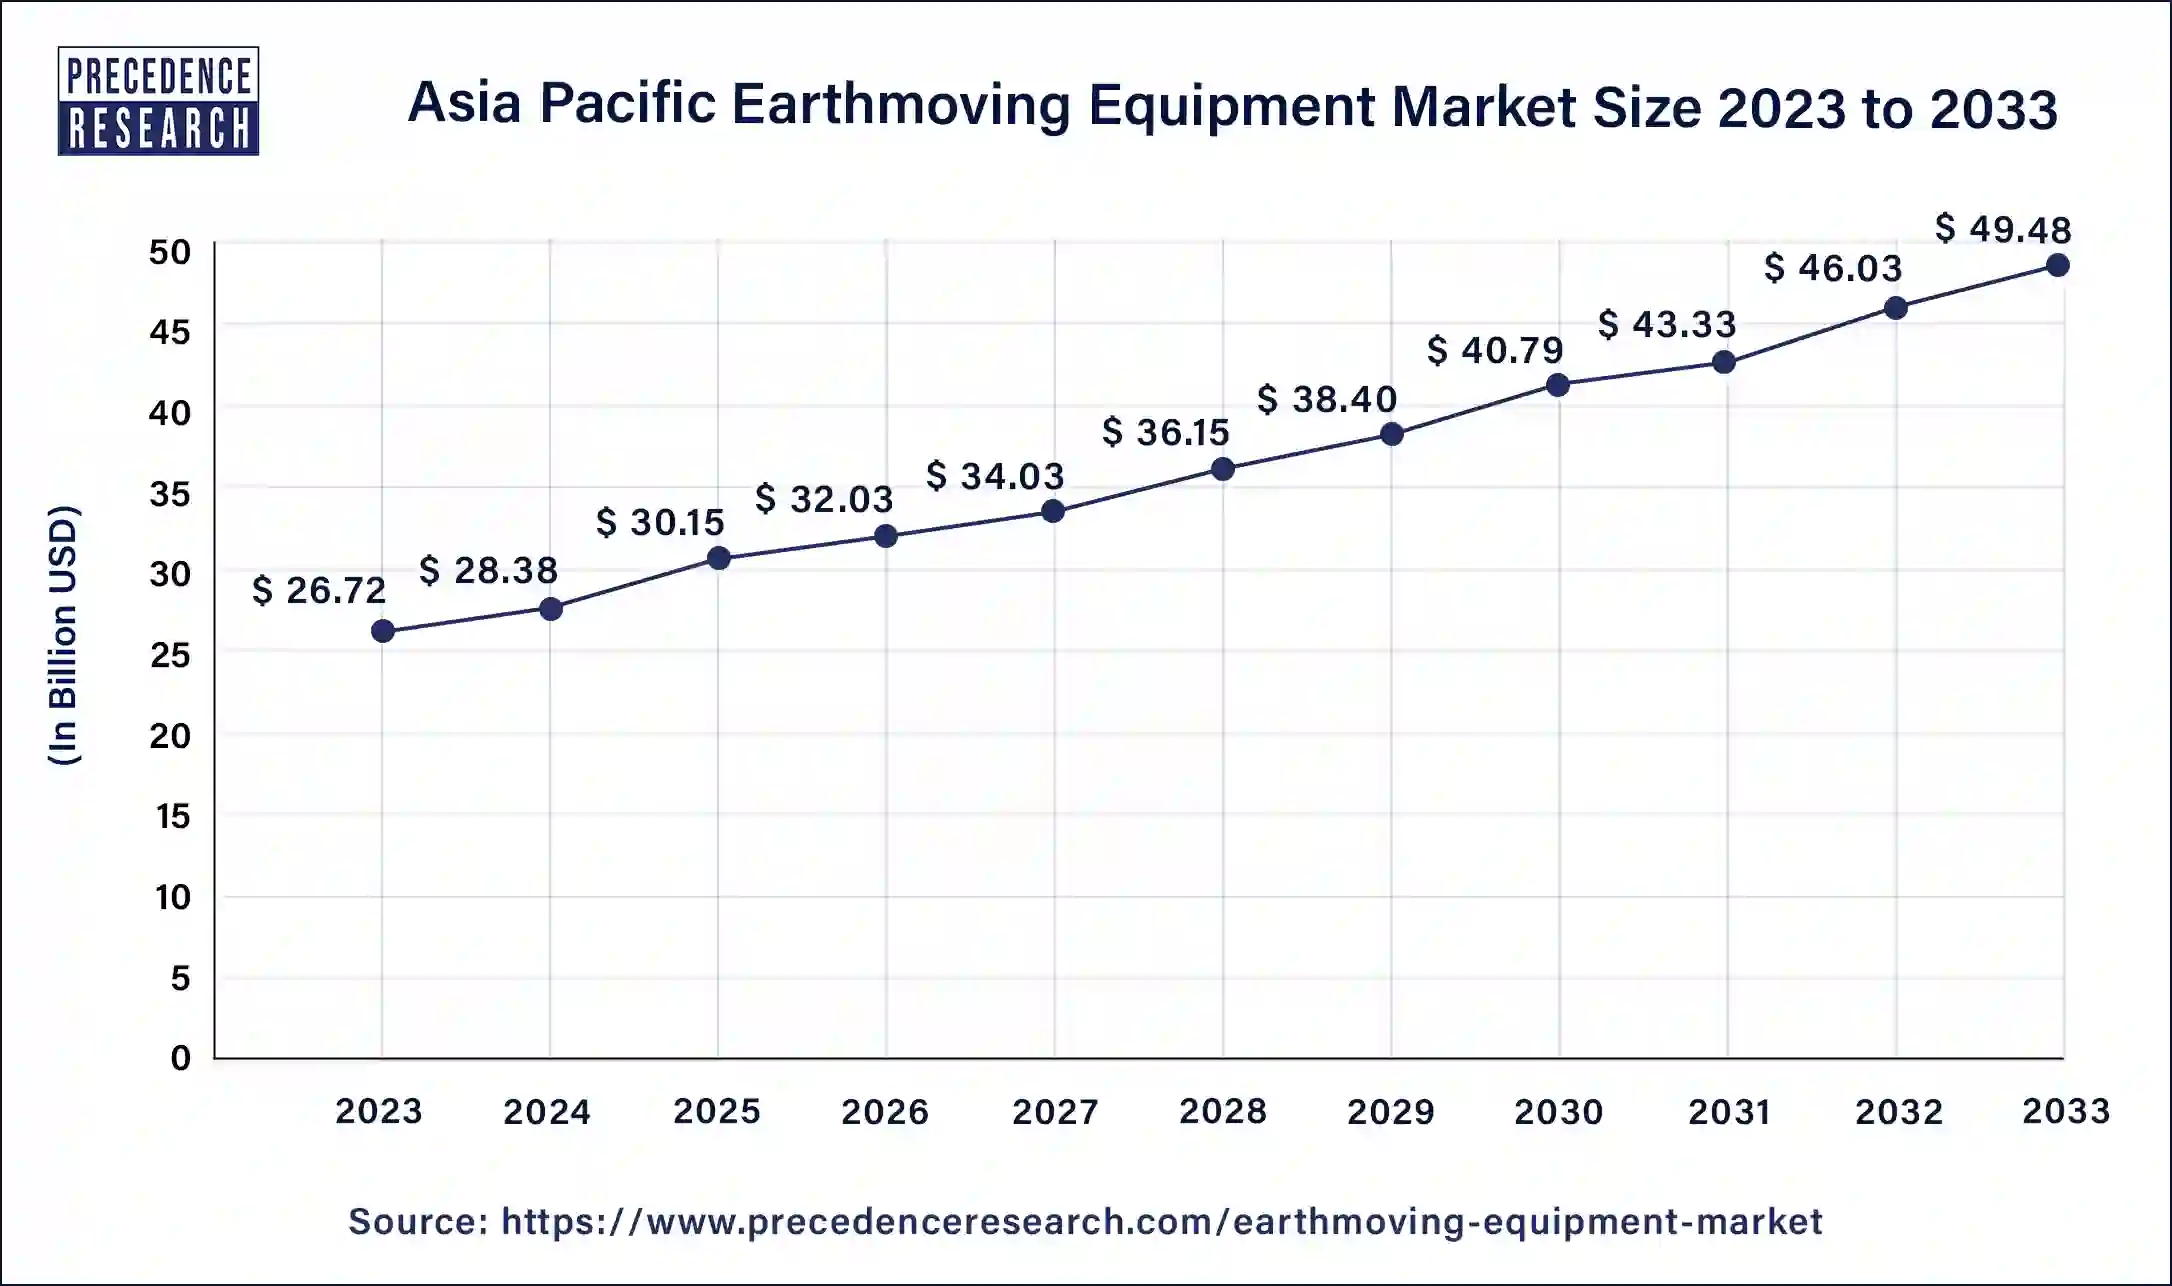 Asia Pacific Earthmoving Equipment Market Size 2024 to 2033